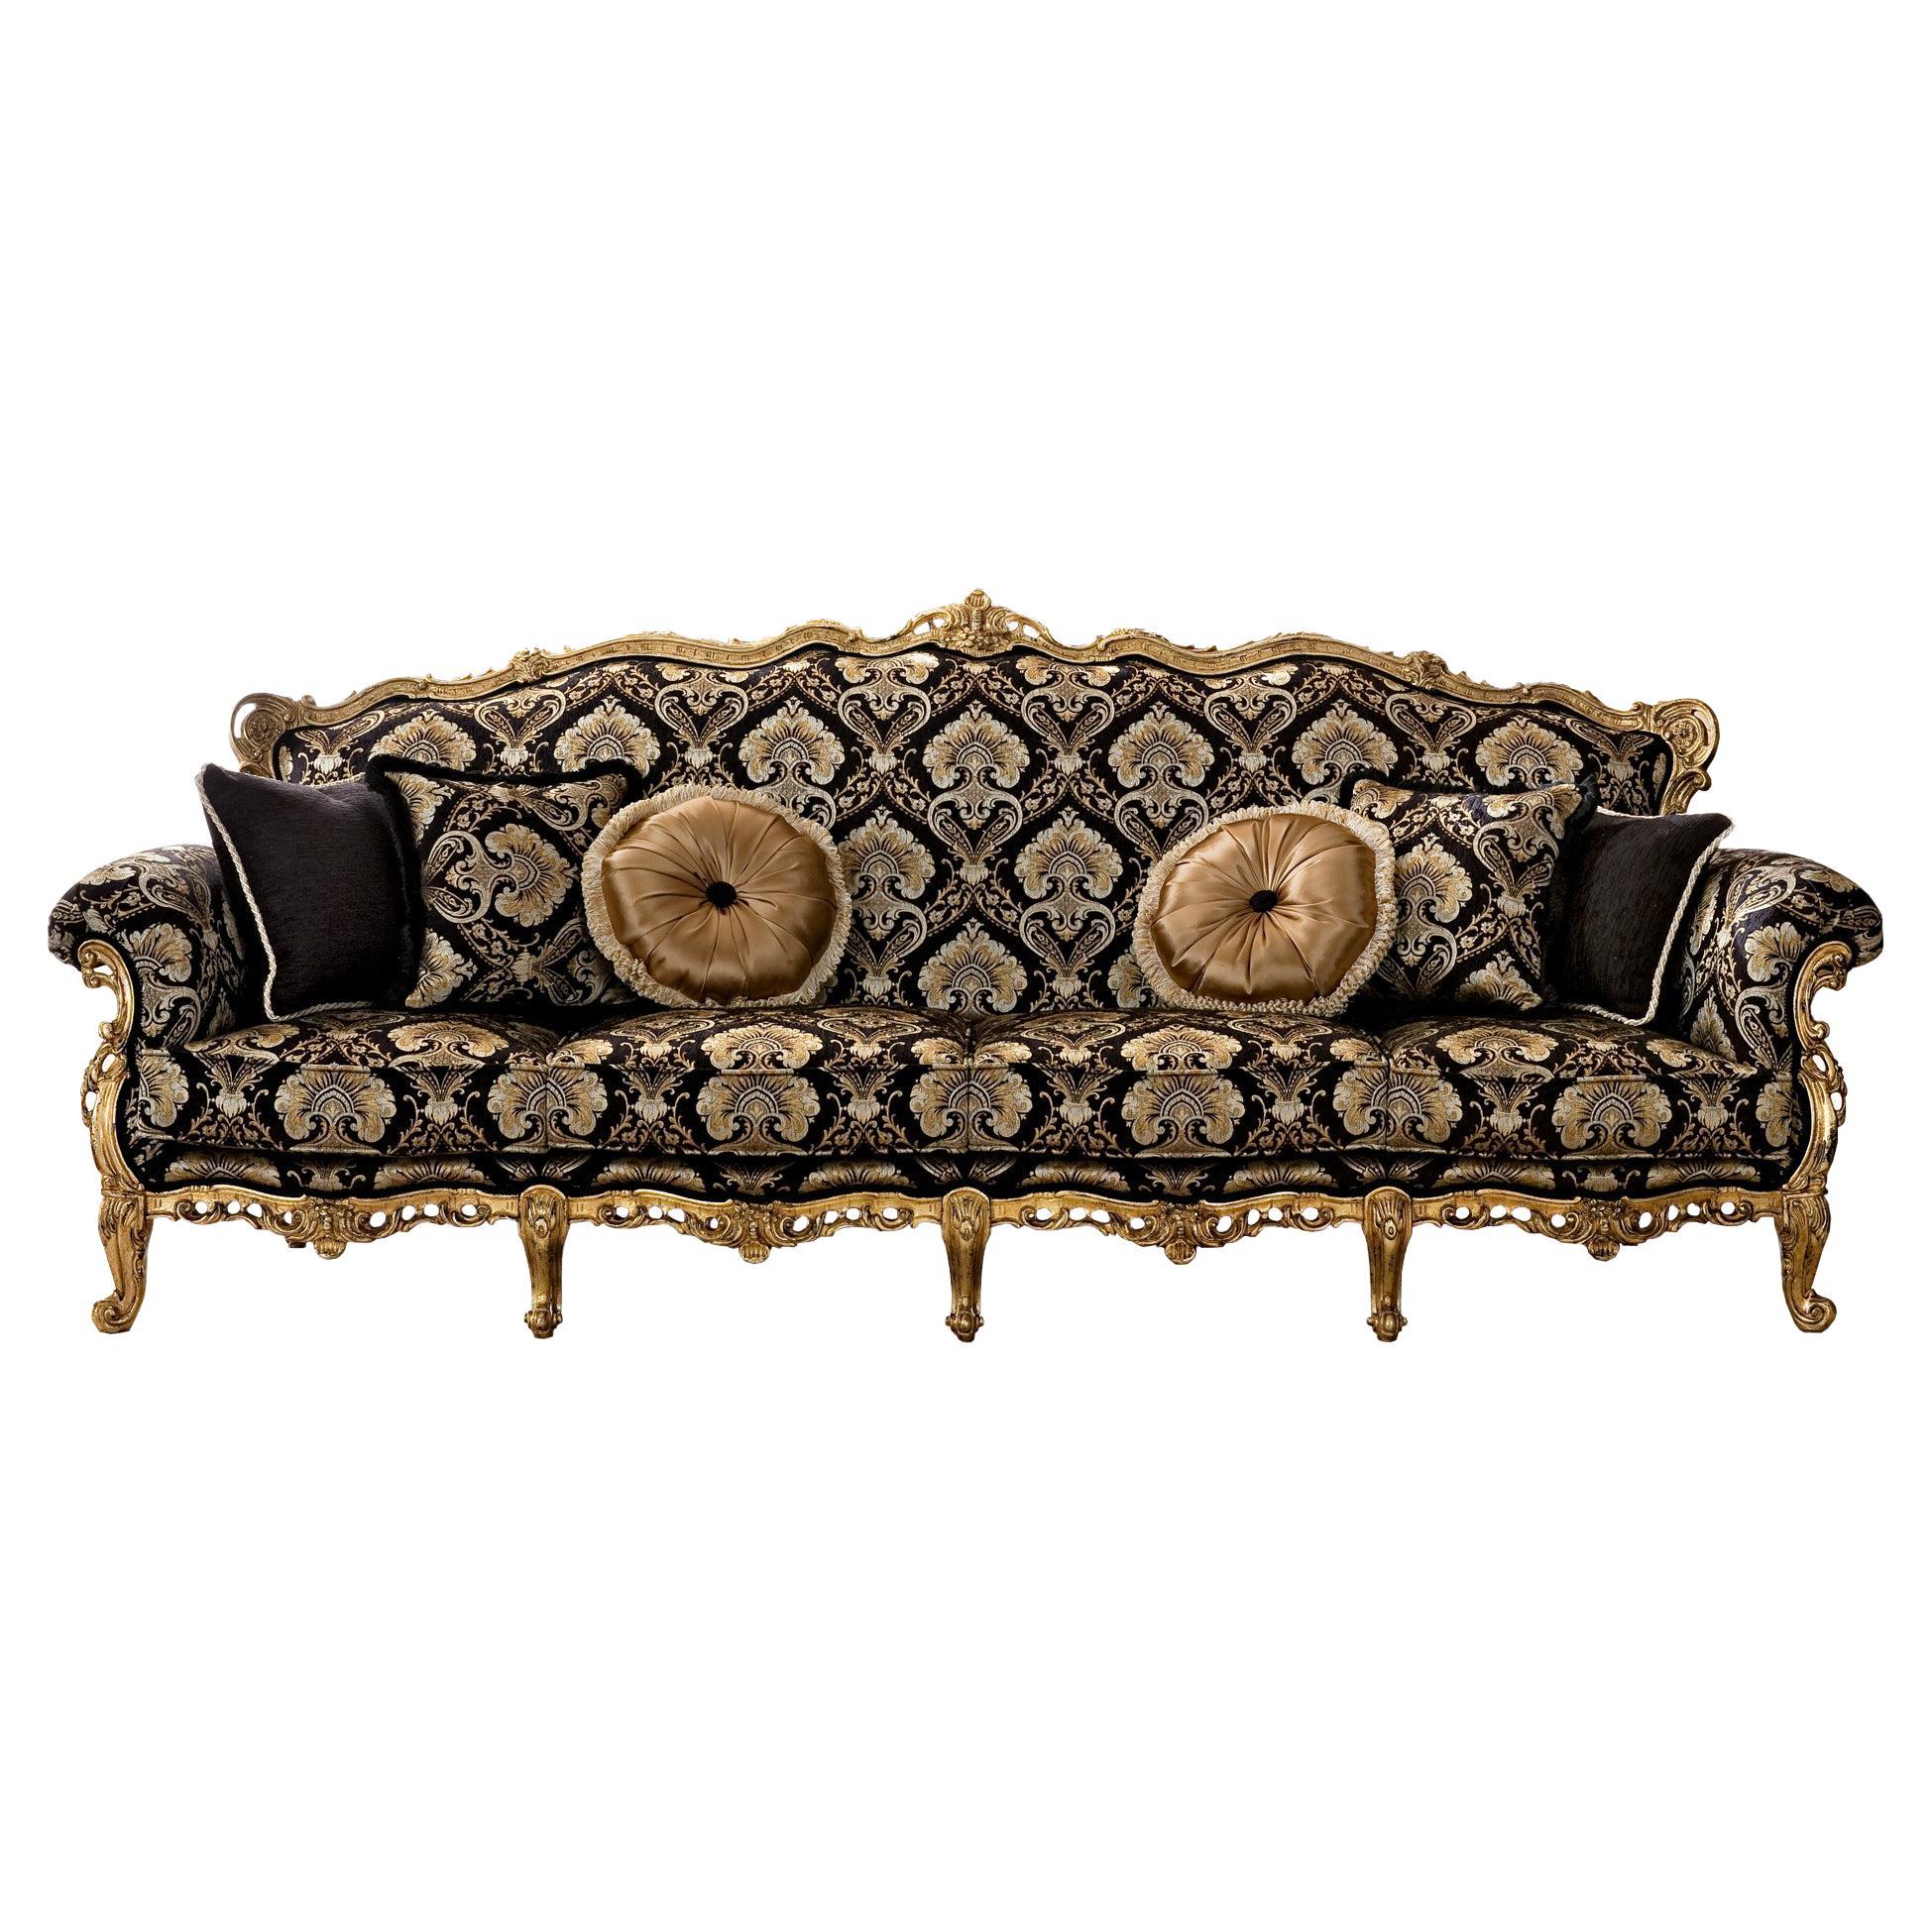 Grand Baroque Four-Seater Sofa in Massive Wood and Patinated Gold Leaf